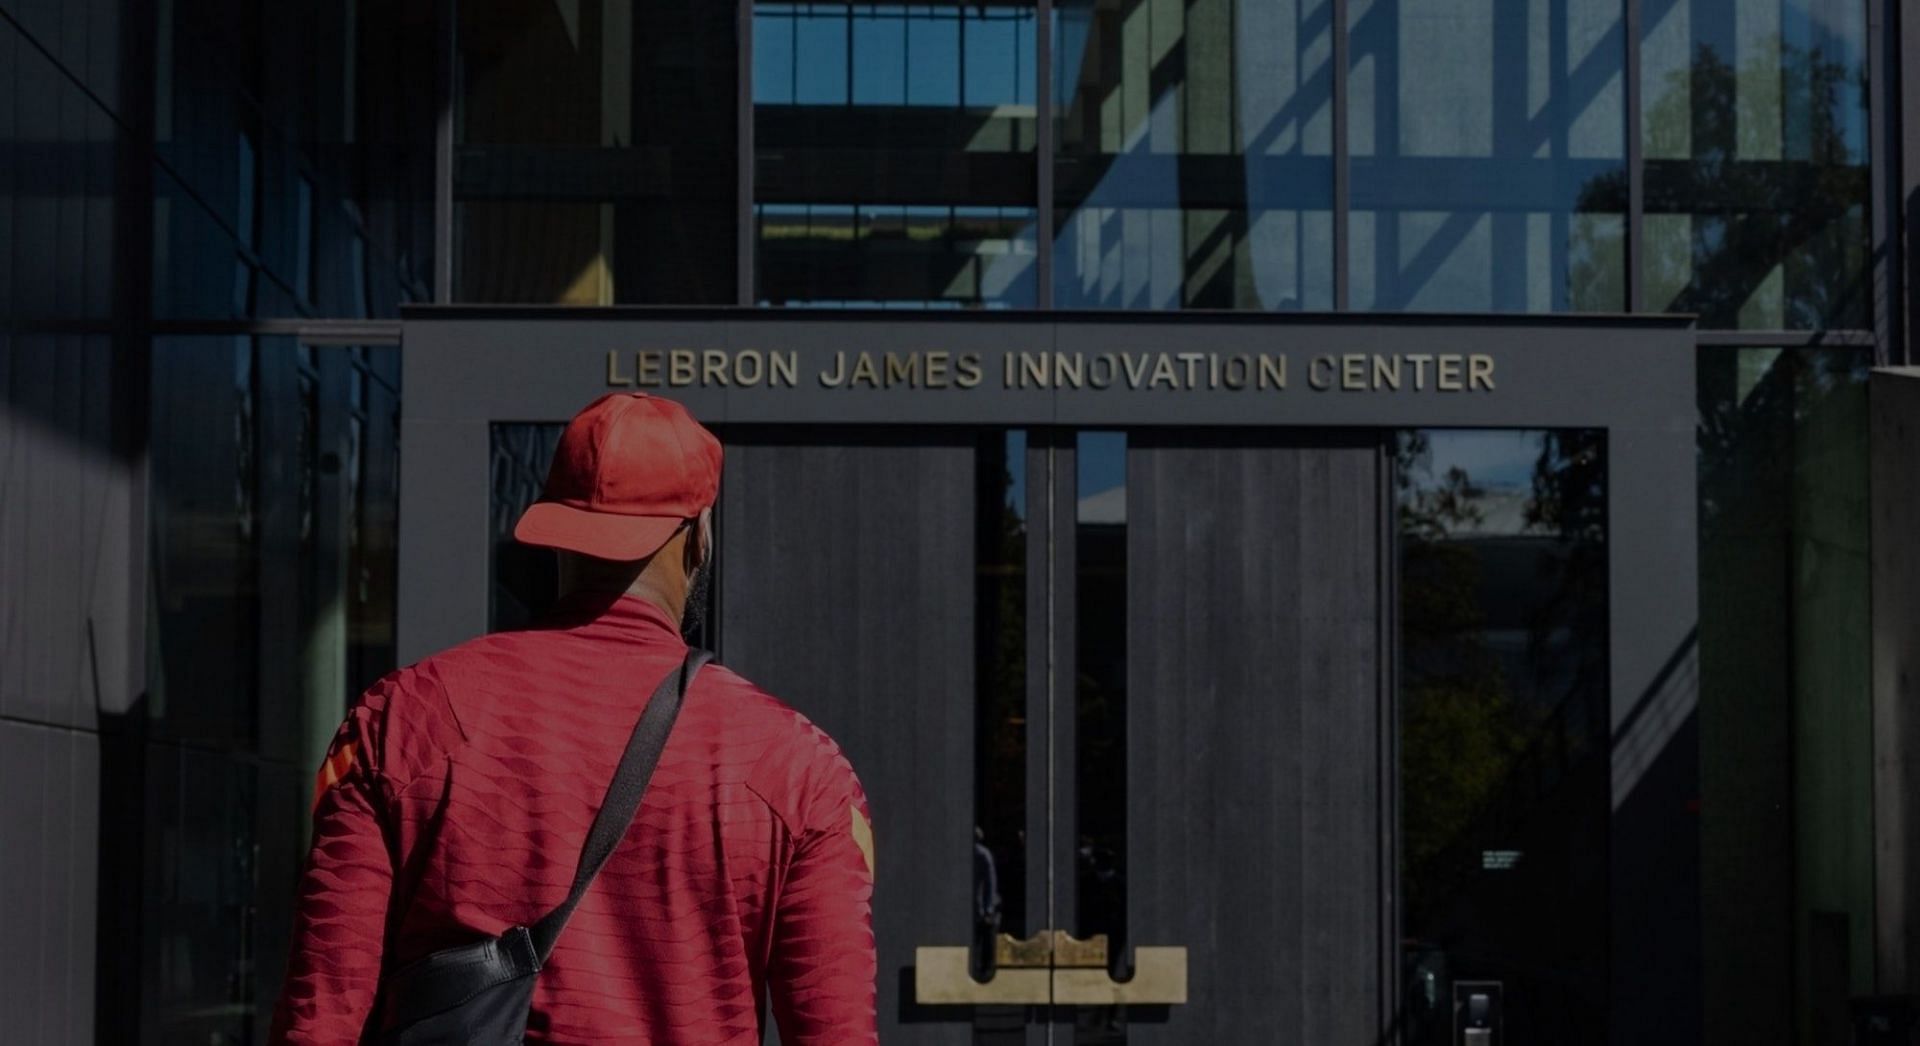 LBJ gets a Nike building in his name 